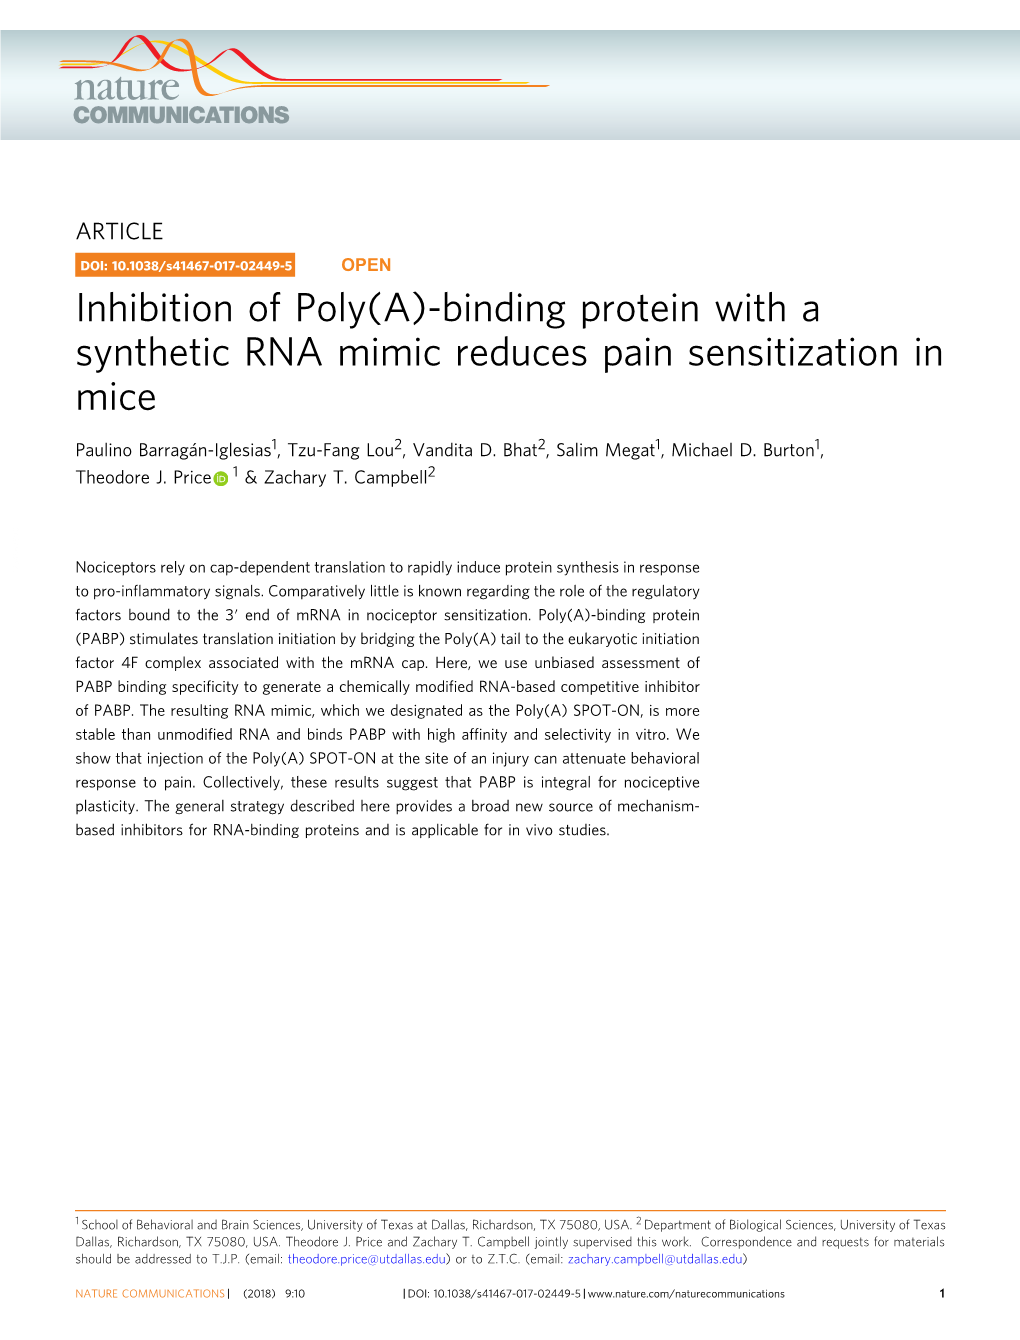 Binding Protein with a Synthetic RNA Mimic Reduces Pain Sensitization in Mice